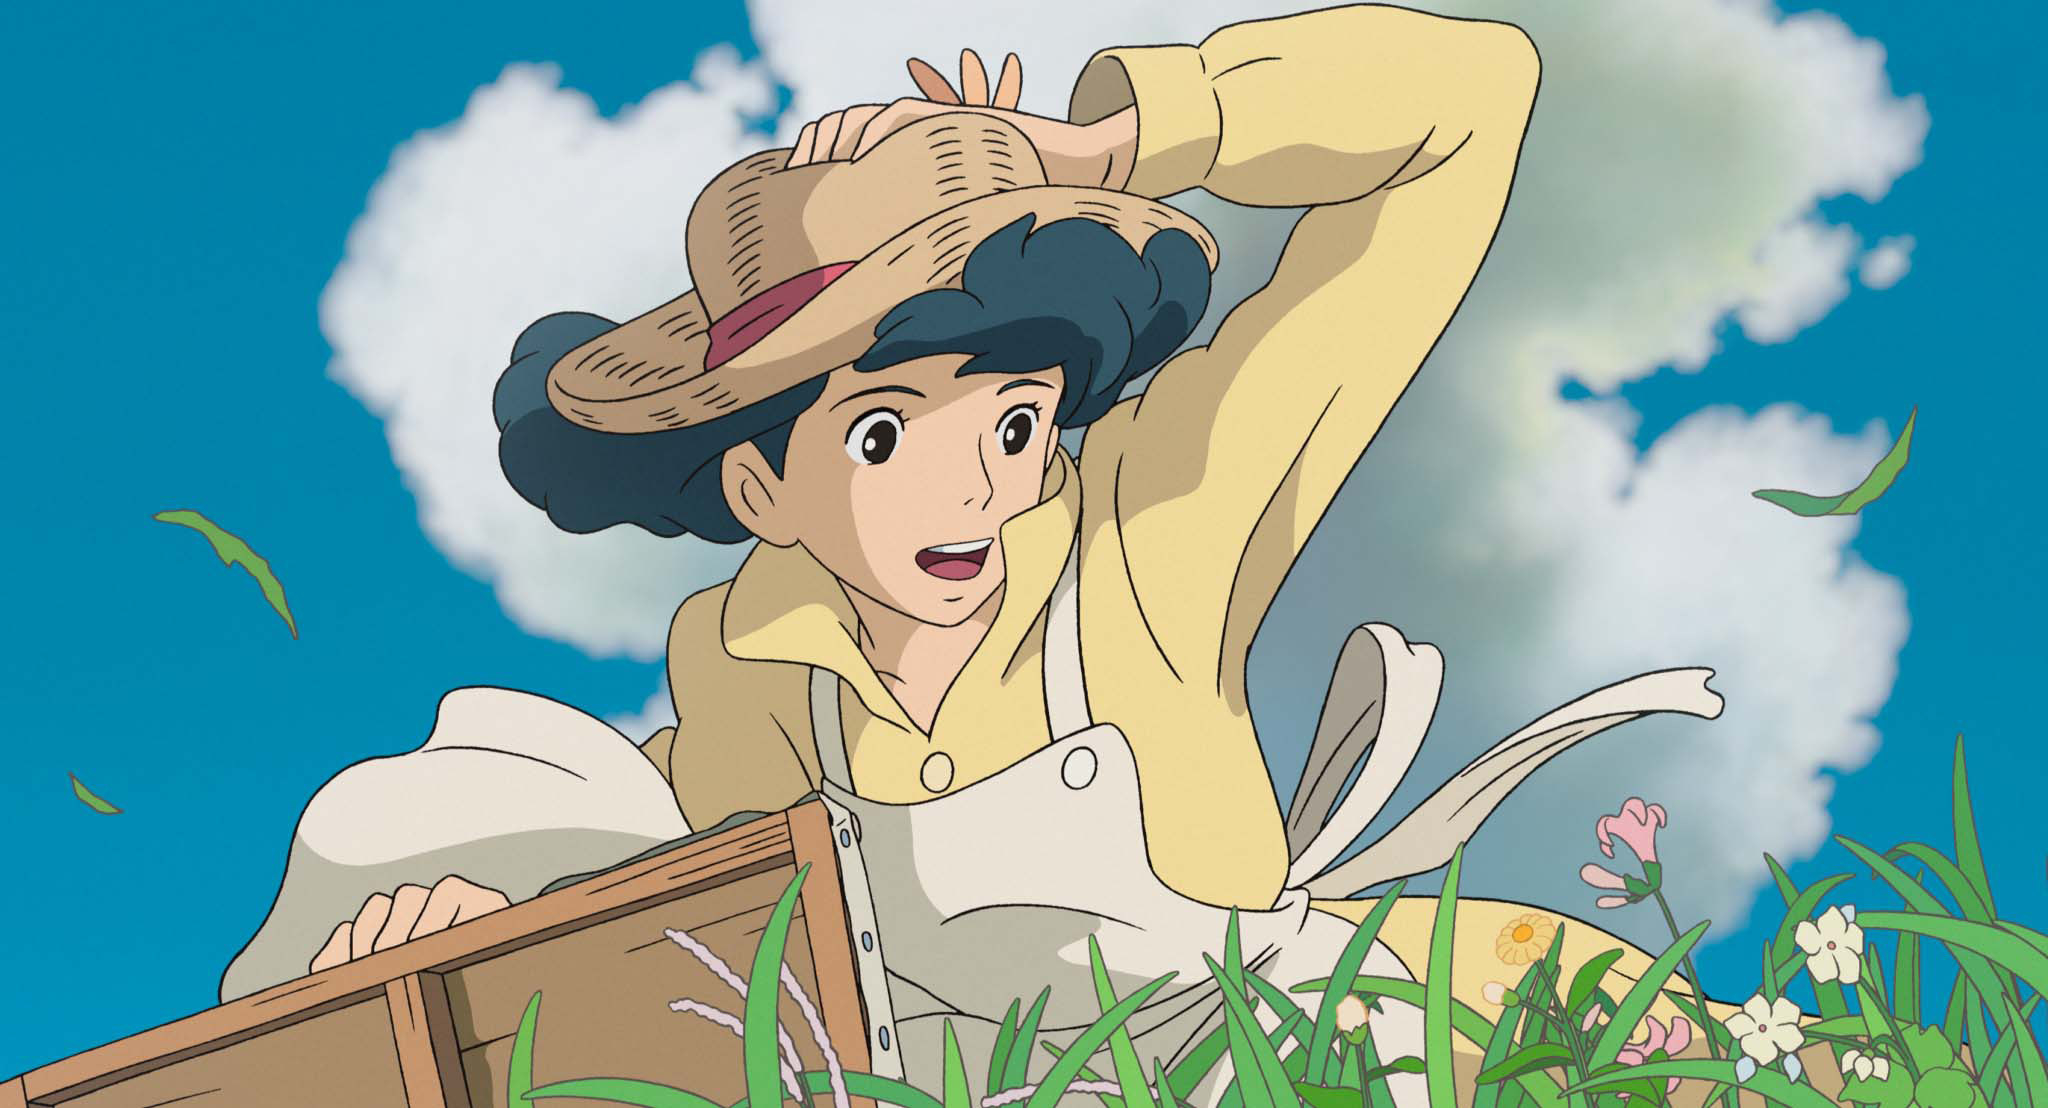 Naoko standing in some grass while holding her hat from blowing off her head